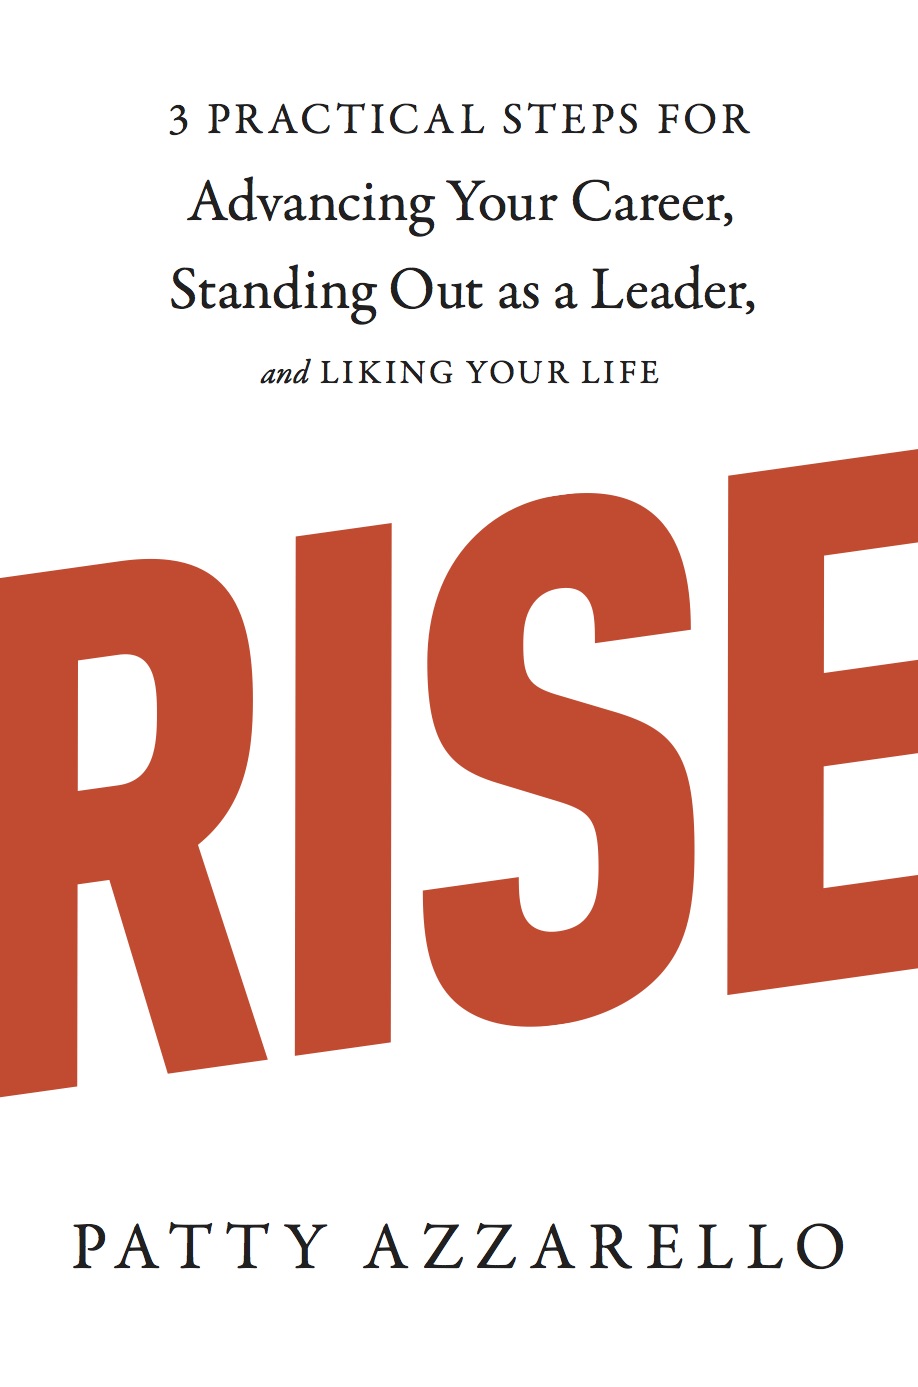 Rise 3 Practical Steps for Advancing Your Career, Standing Out as a Leader, and Liking Your Life